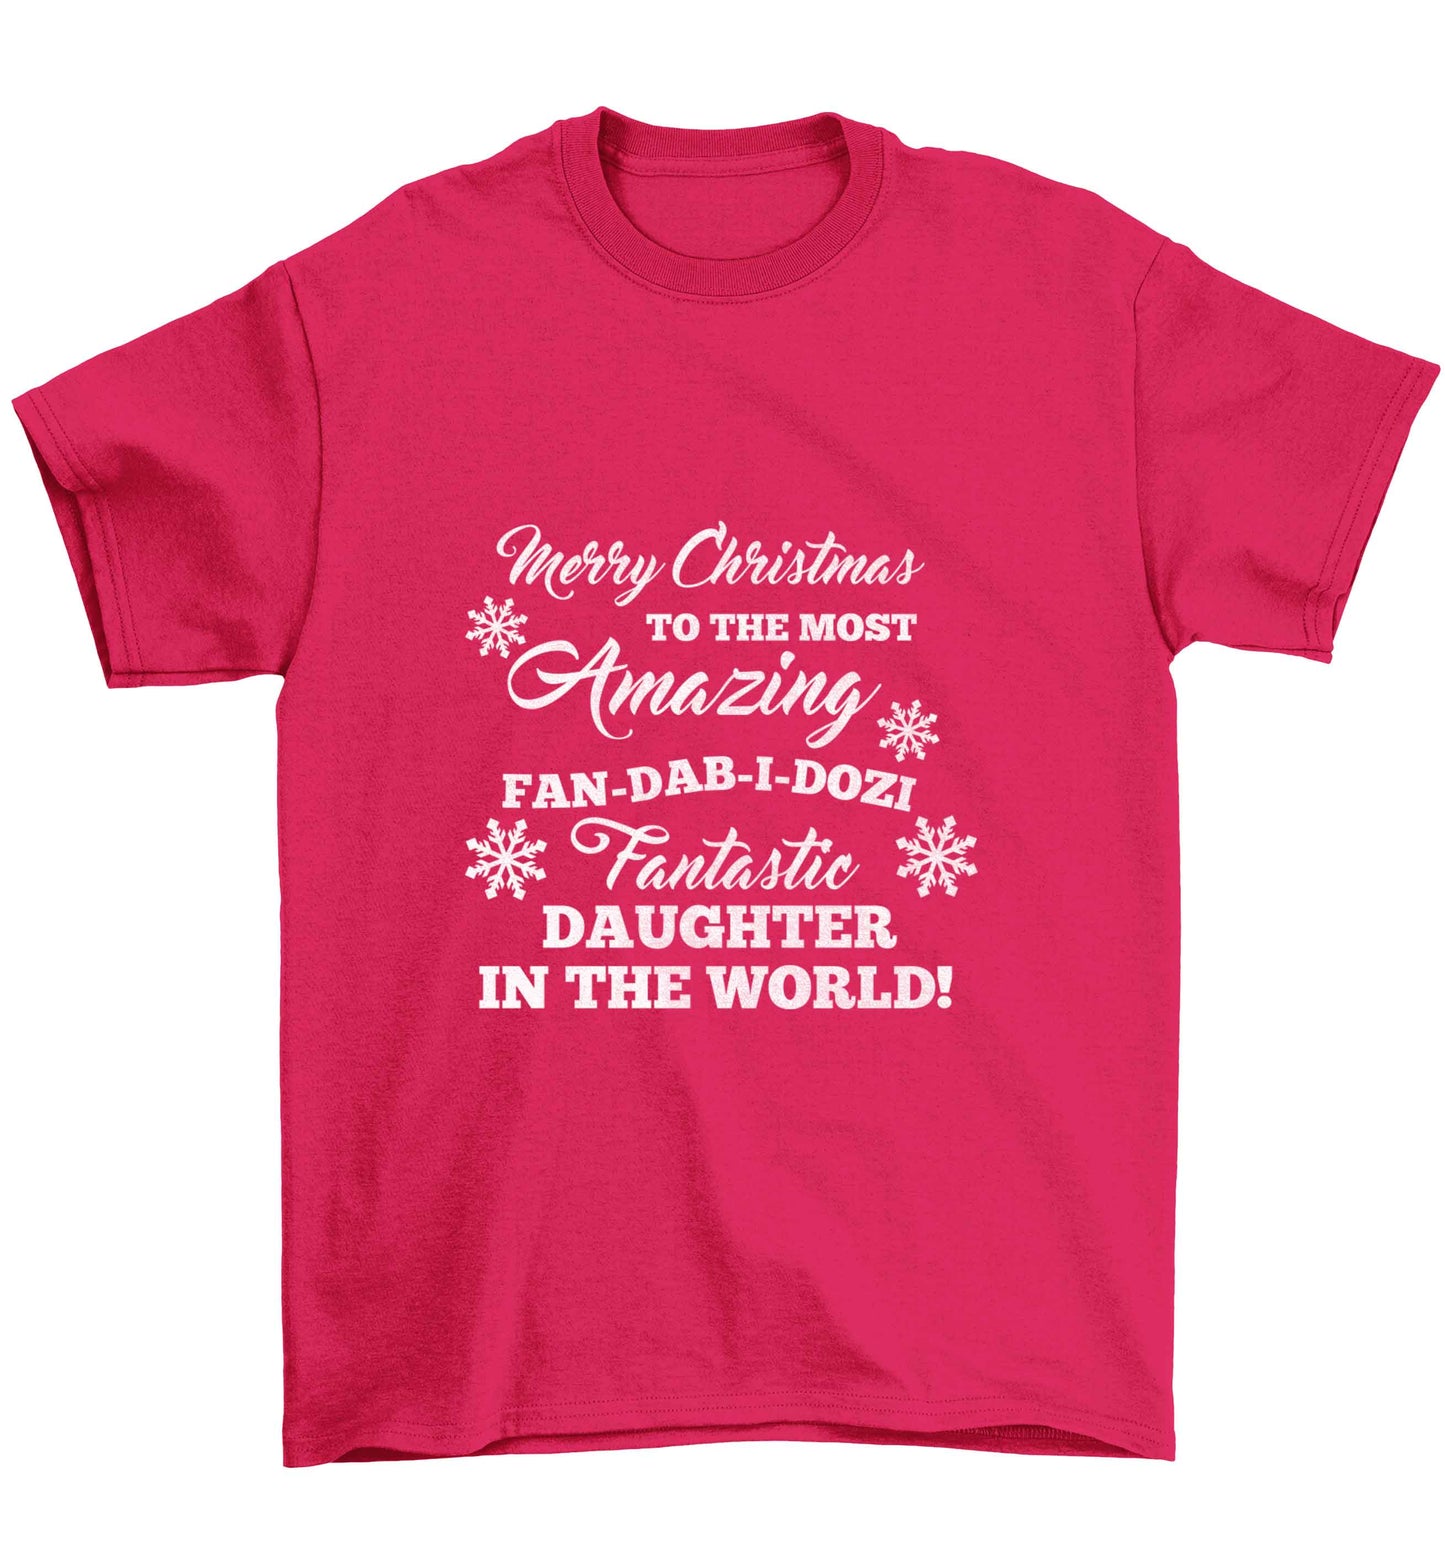 Merry Christmas to the most amazing fan-dab-i-dozi fantasic Daughter in the world Children's pink Tshirt 12-13 Years